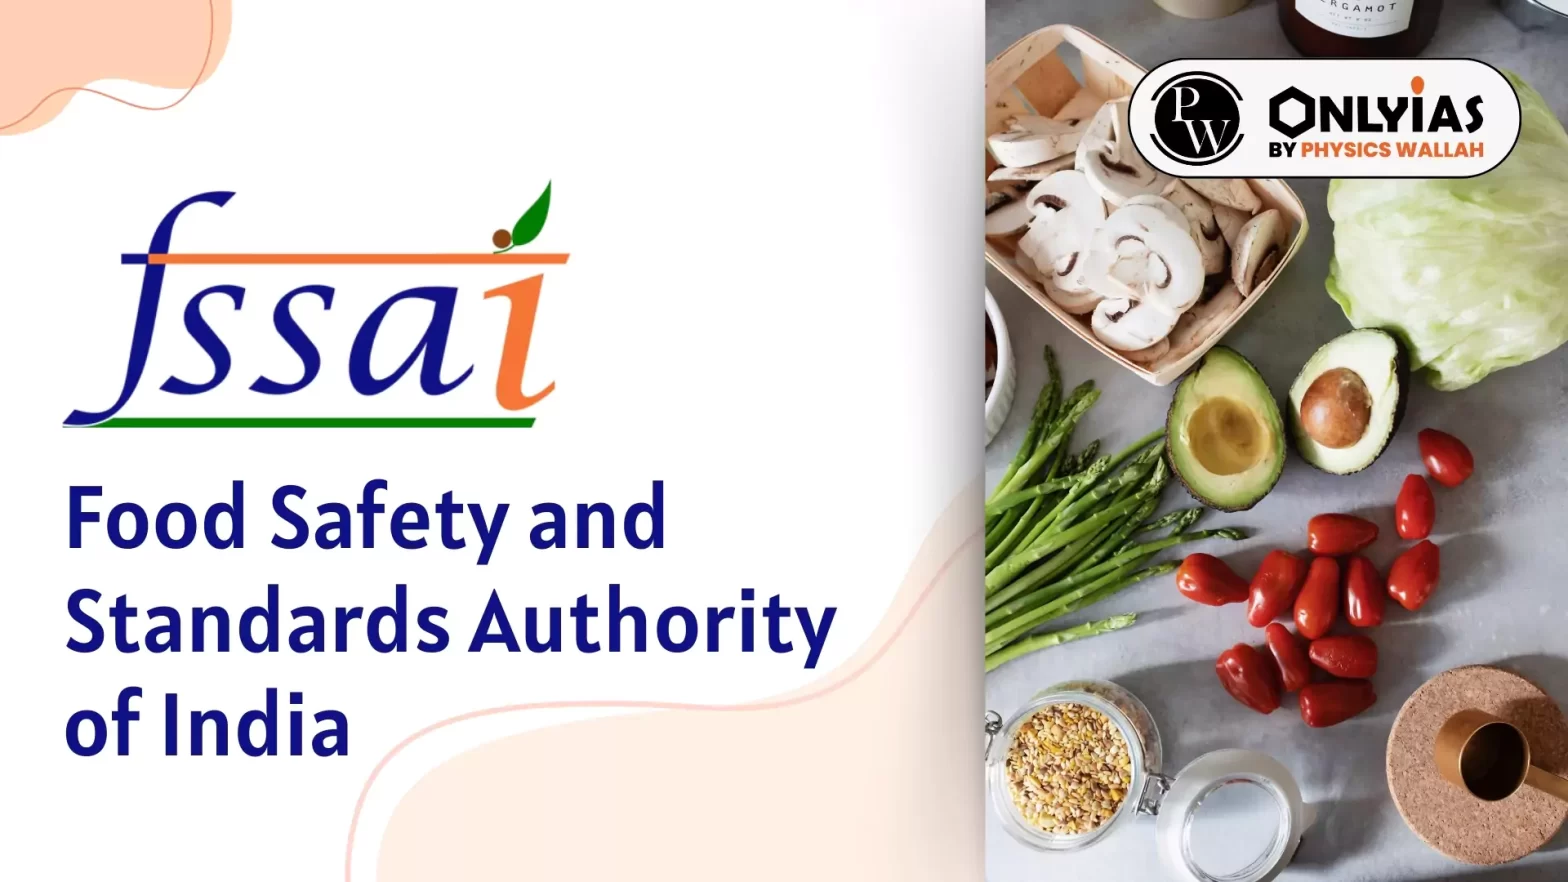 FSSAI: Food Safety and Standards Authority of India